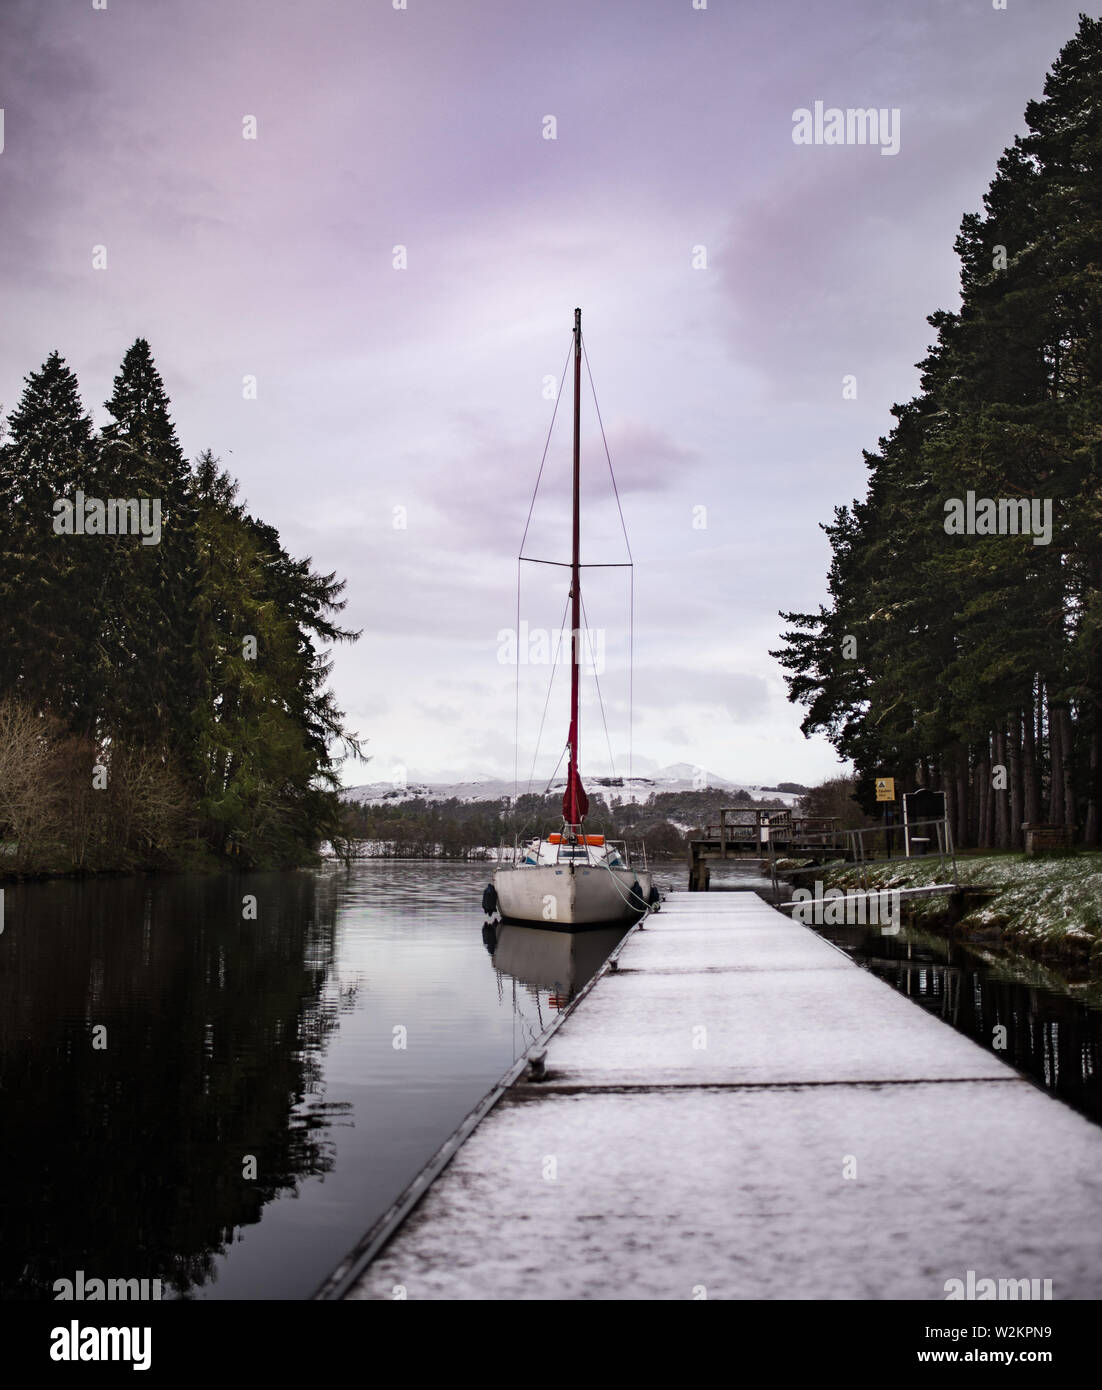 April snow in Kytra, moored boat Stock Photo